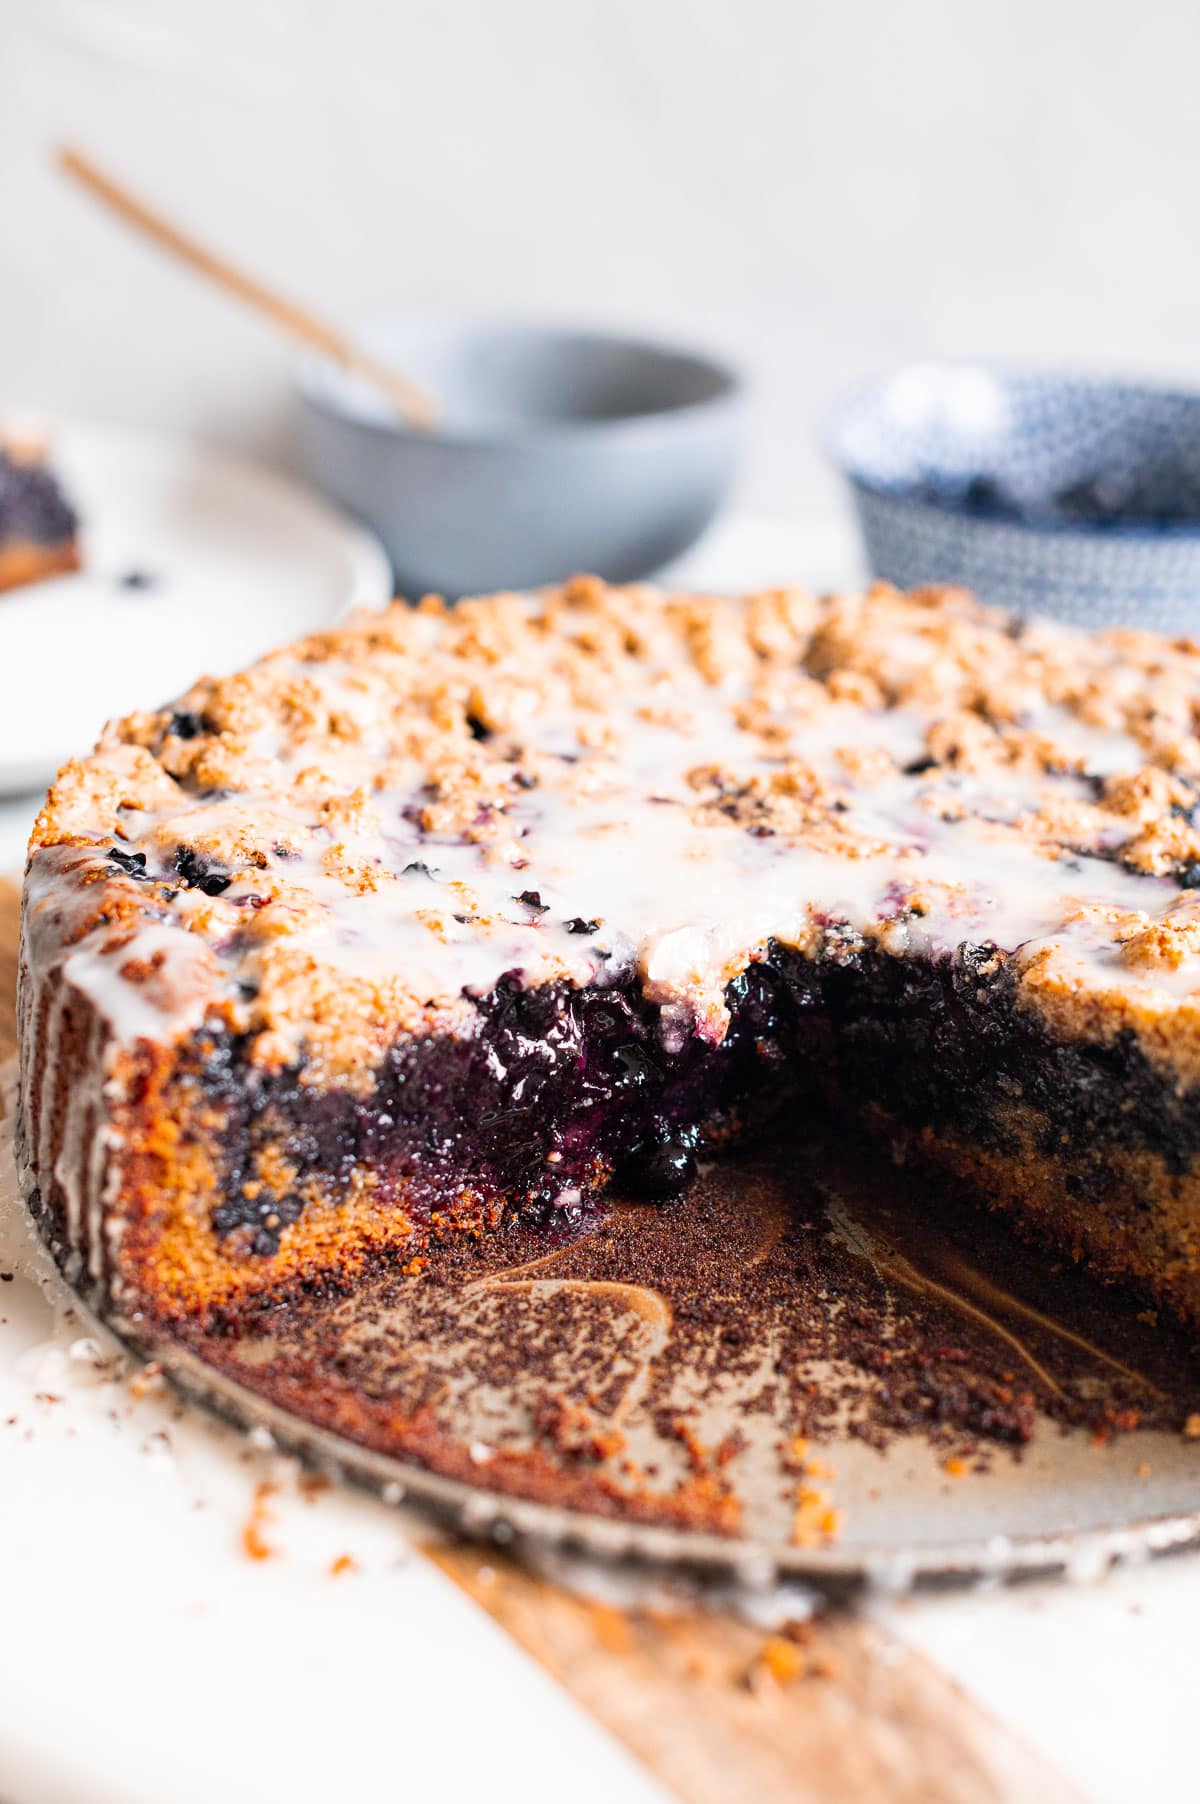 Blueberry coffee cake sliced and showing texture inside.